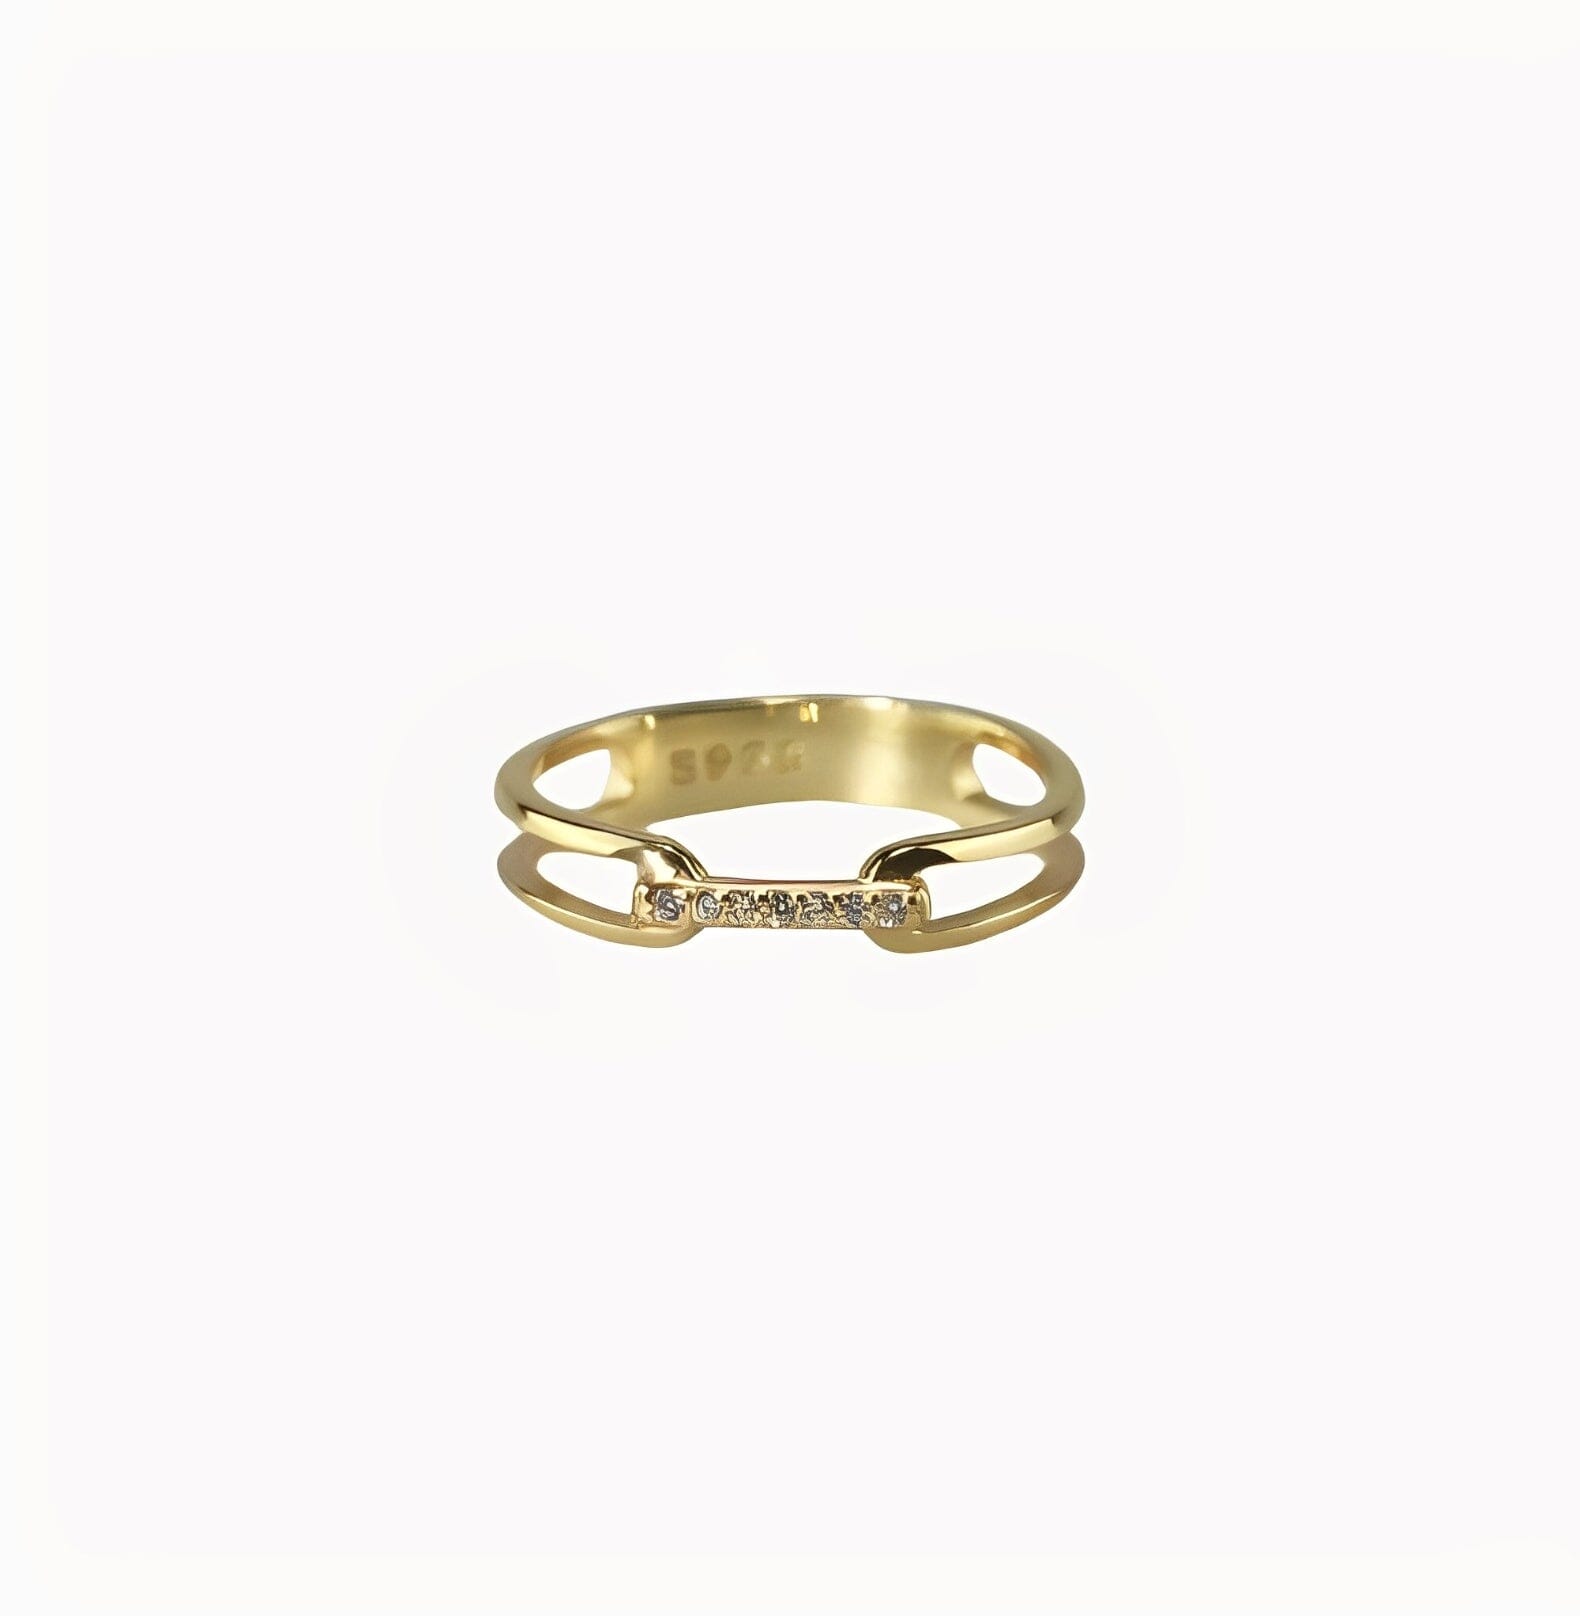 MOLLY RING ring Yubama Jewelry Online Store - The Elegant Designs of Gold and Silver ! 